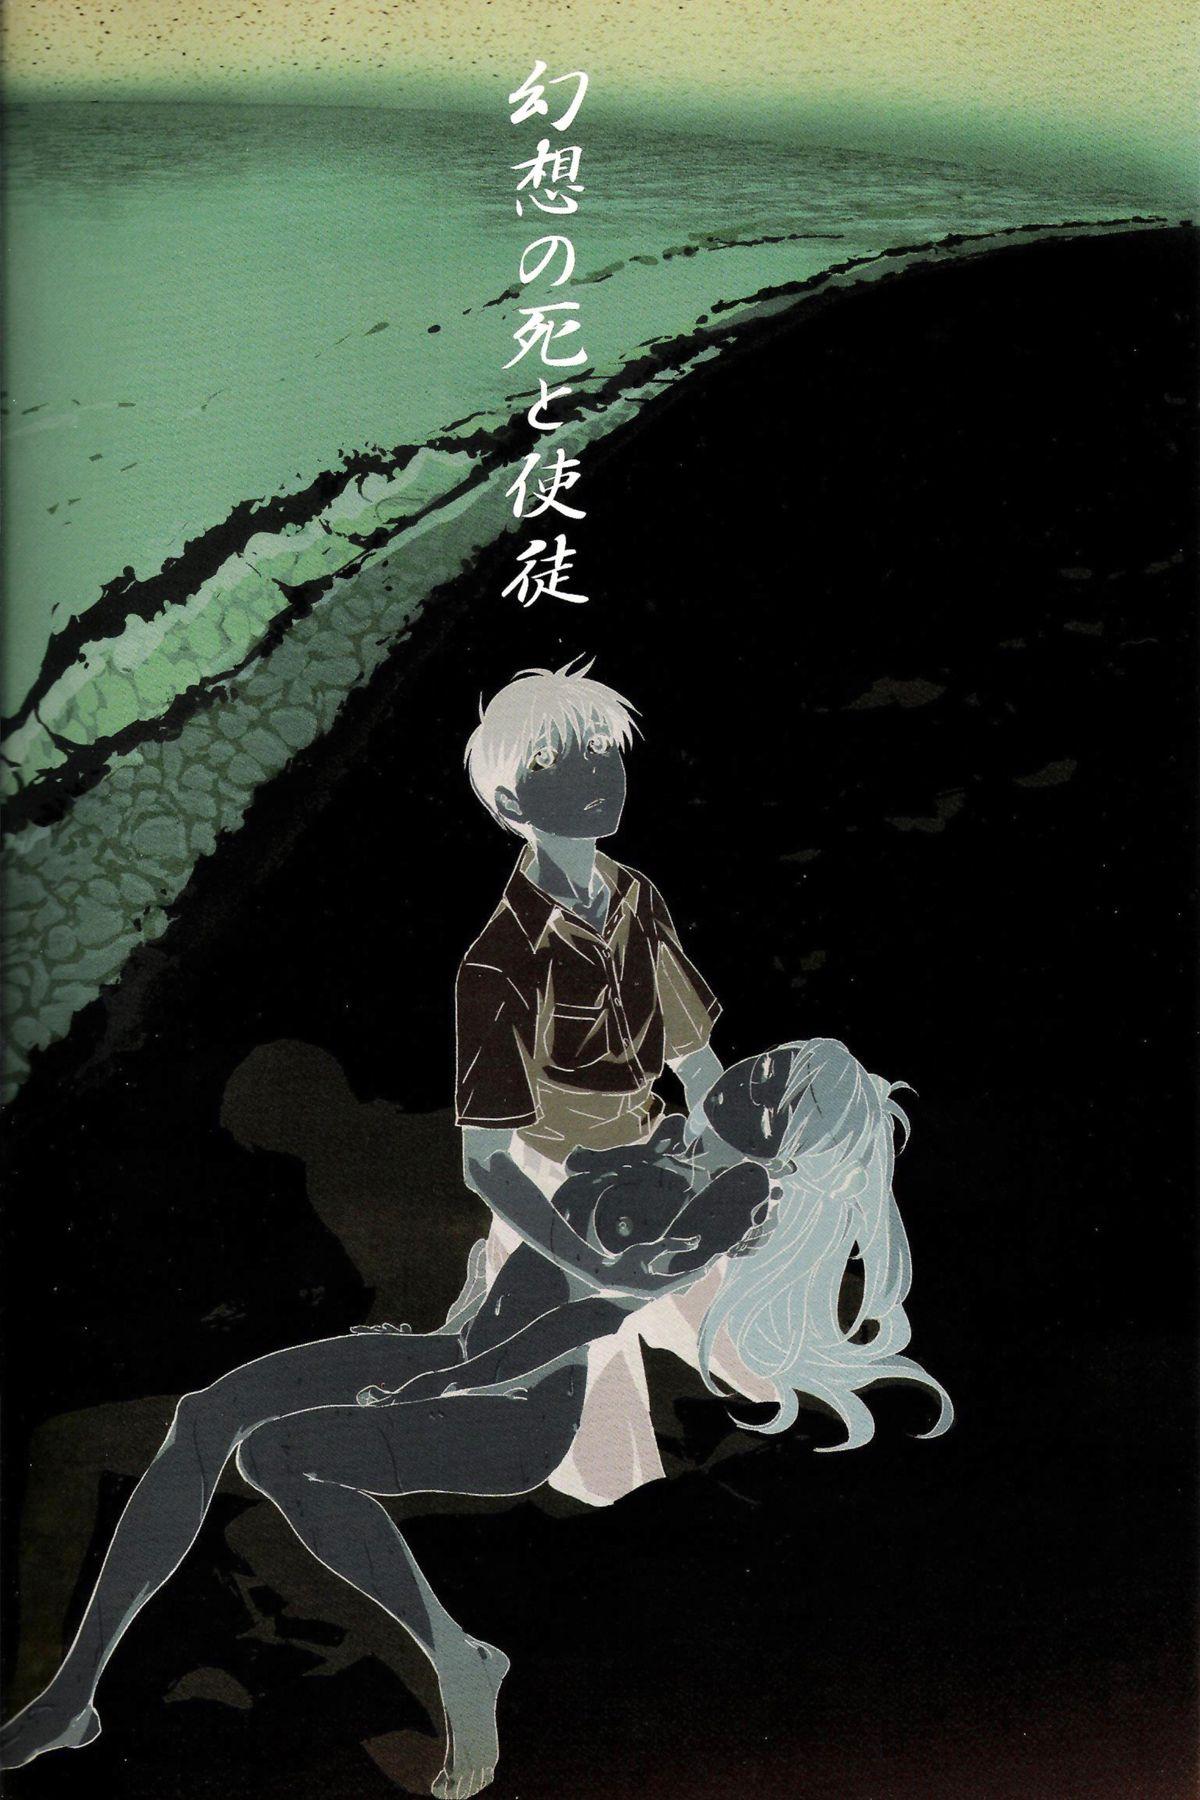 Granny Gensou no Shi to Shito | Death of Illusion and an Angel - Neon genesis evangelion Group Sex - Page 2